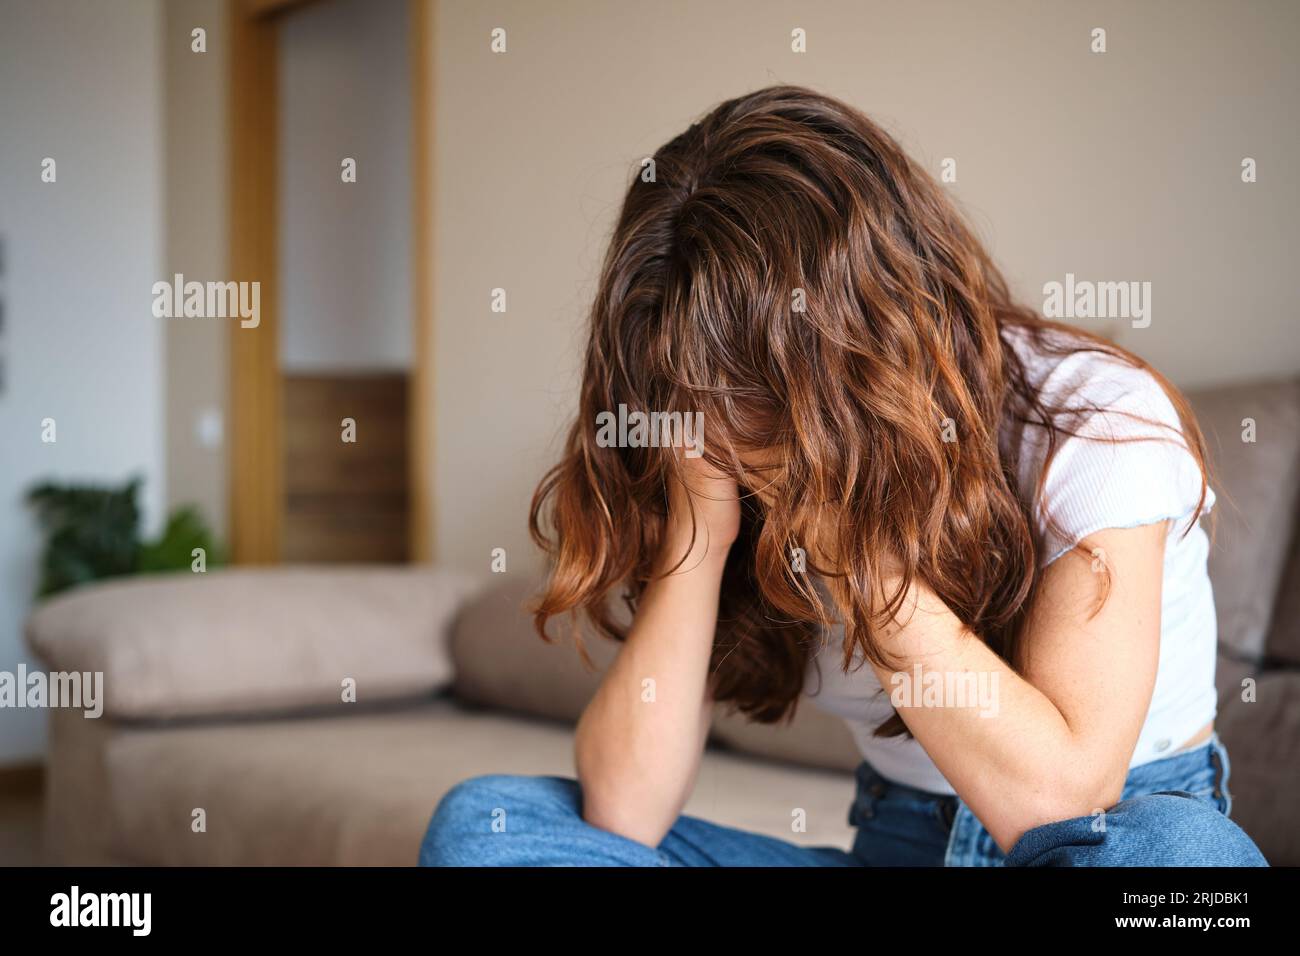 Sad woman covering the face with hands at home Stock Photo